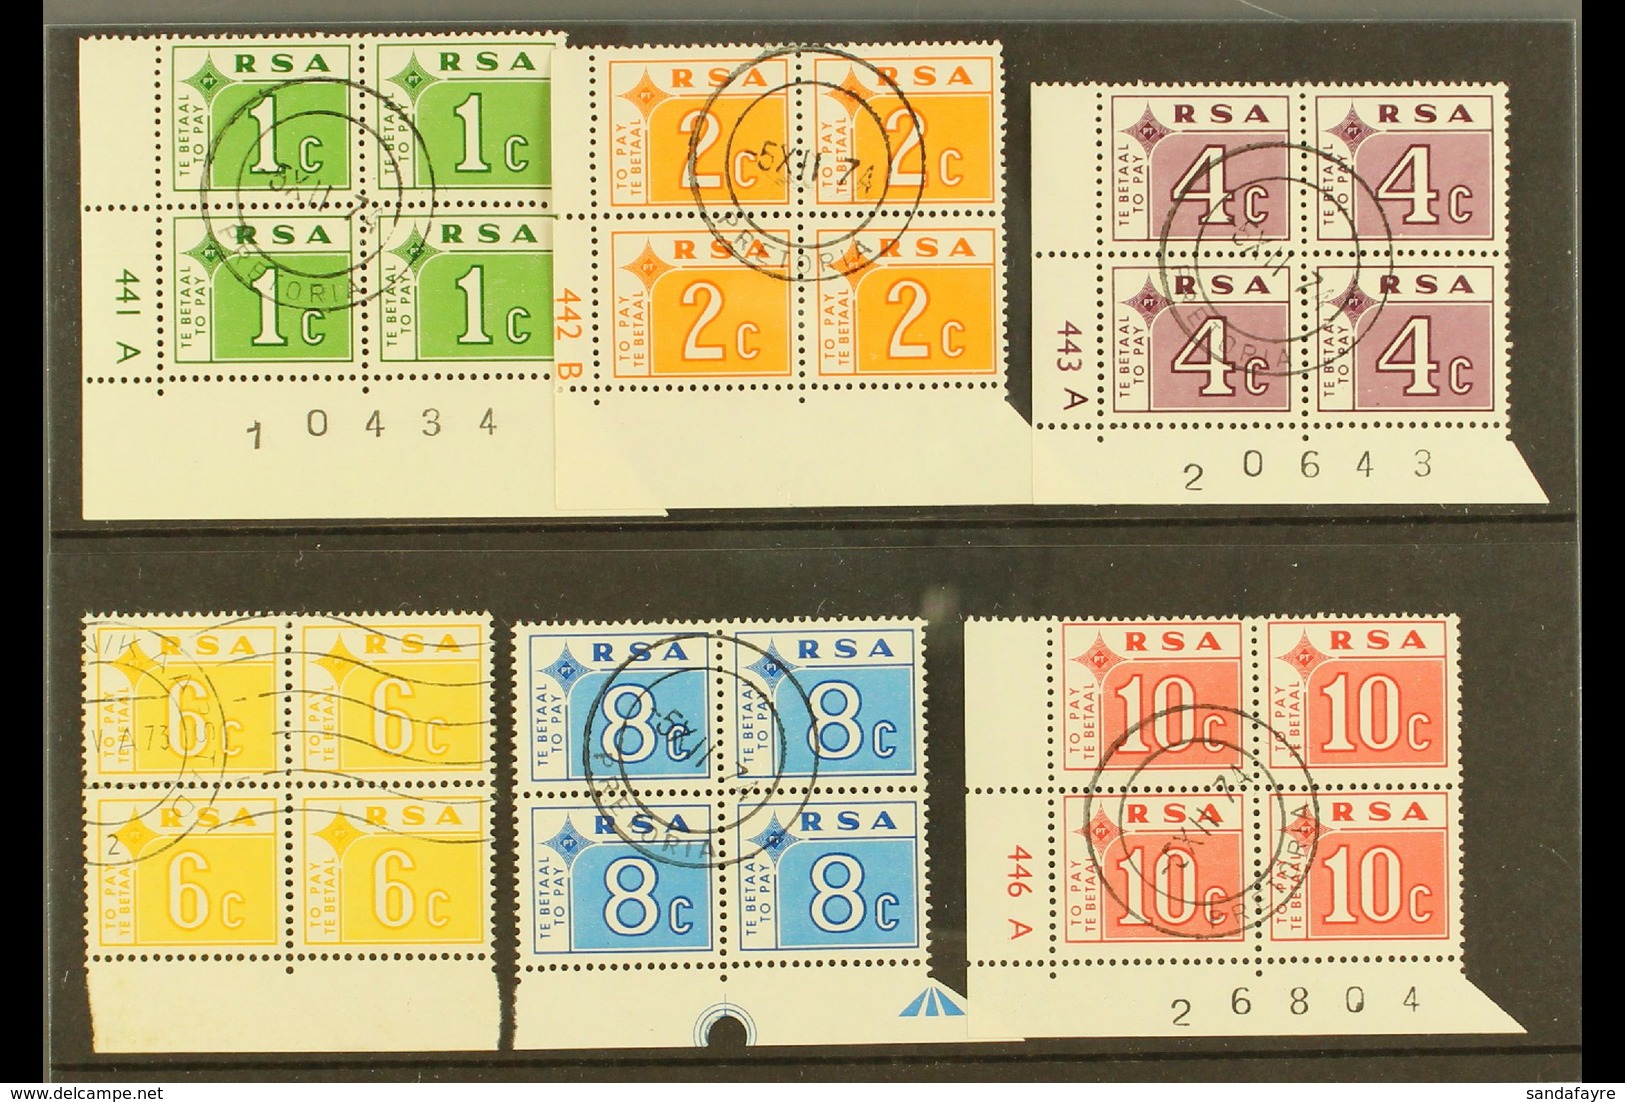 POSTAGE DUES 1972 Set In Blocks Of 4, Mostly Cylinders, SG D75/80, Used, Cancelled To Order (6 Blocks). For More Images, - Unclassified